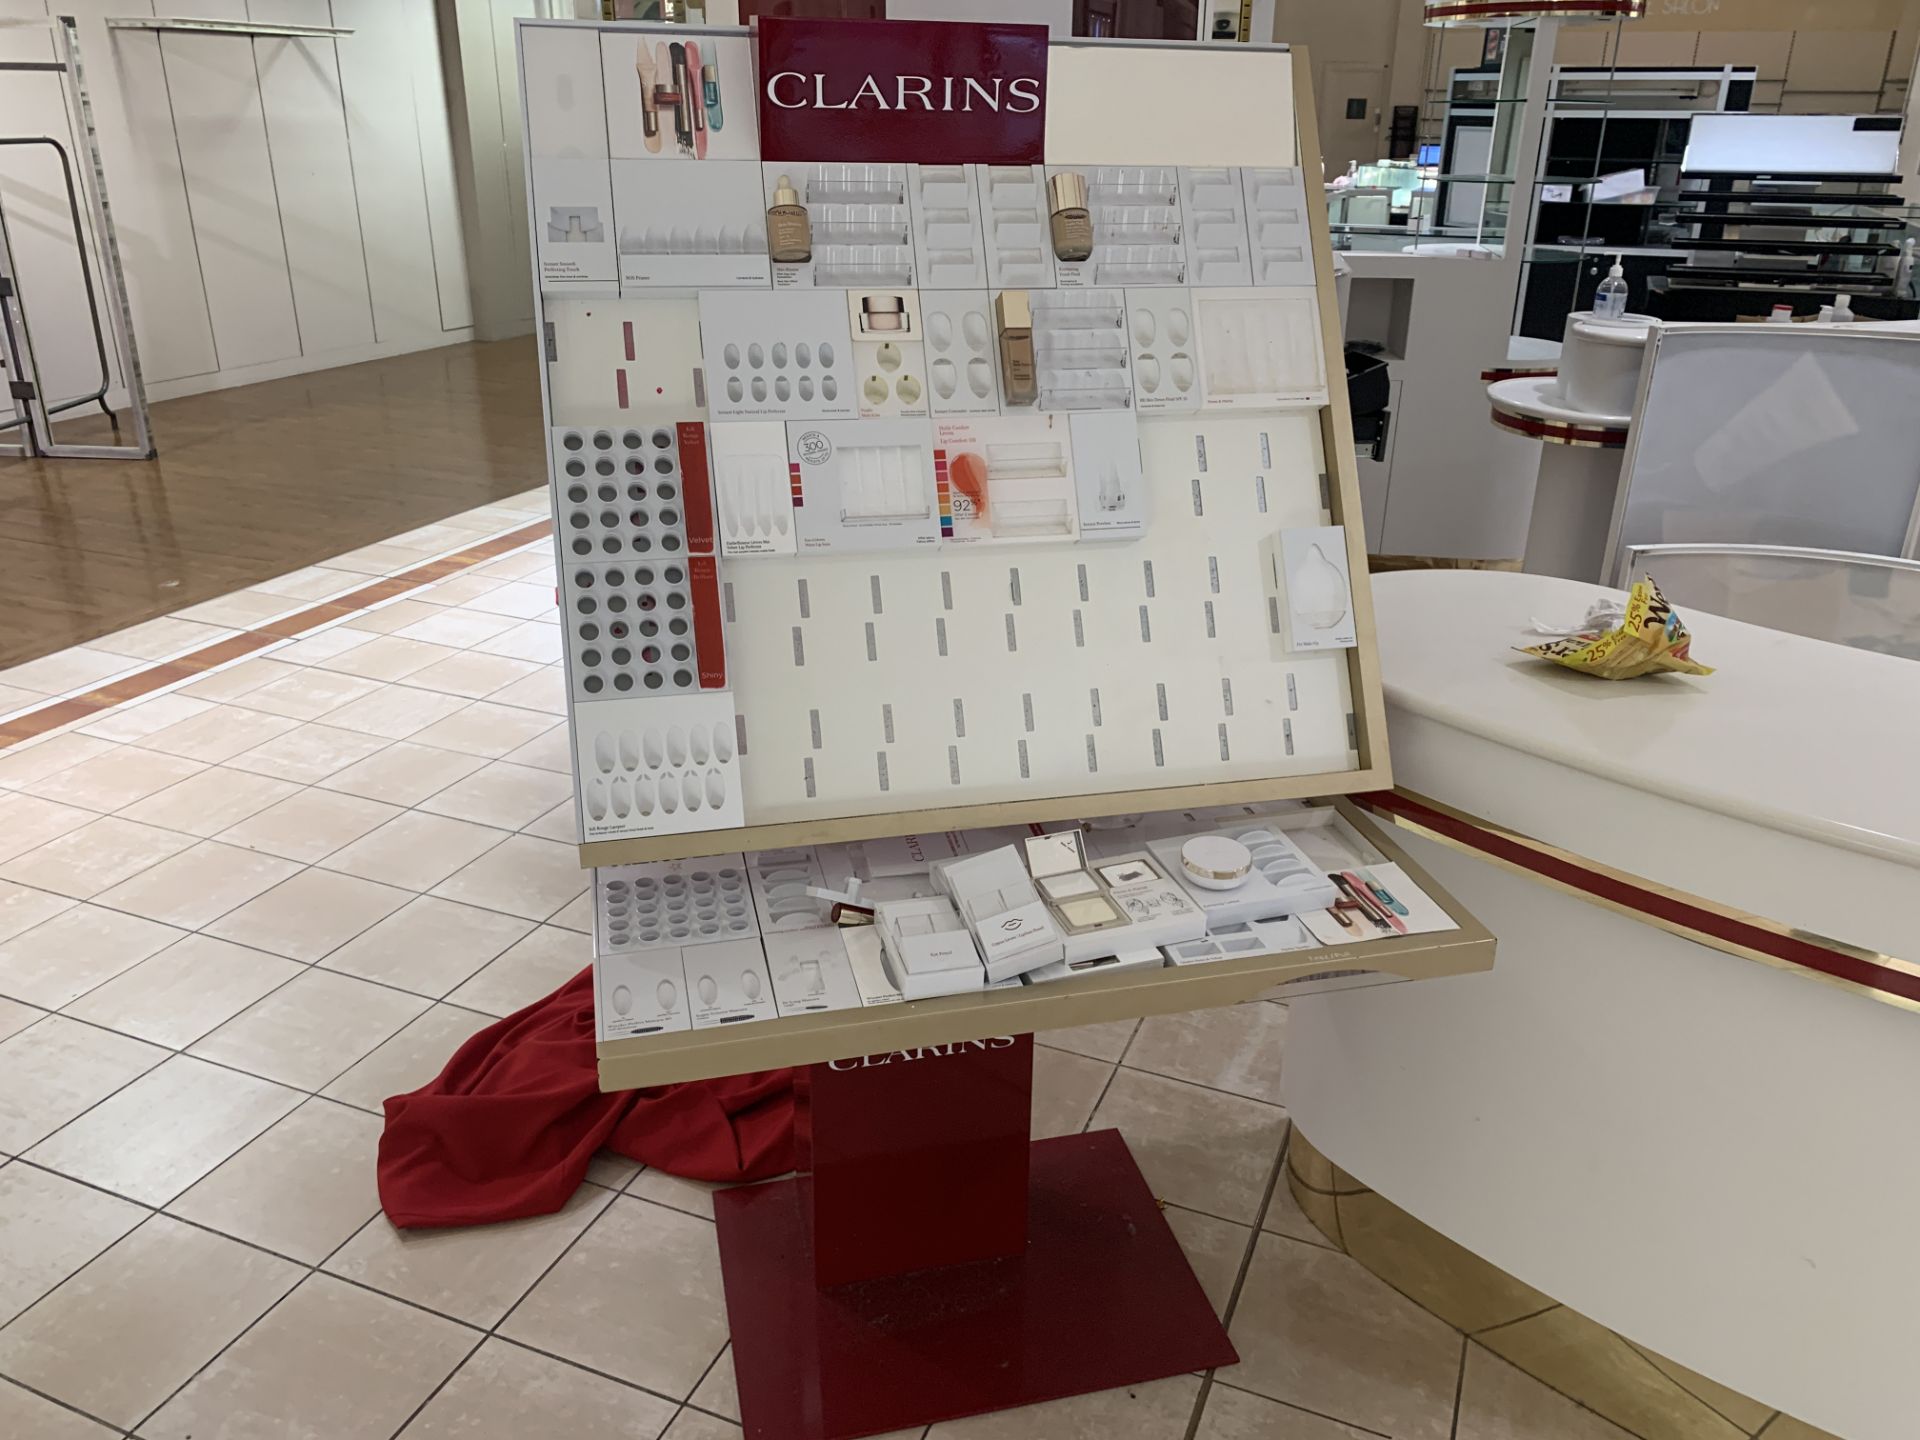 LARGE CLARINS FULL DISPLAY SET UP INCLUDING STOOLS PORTABLE DISPLAY ETC